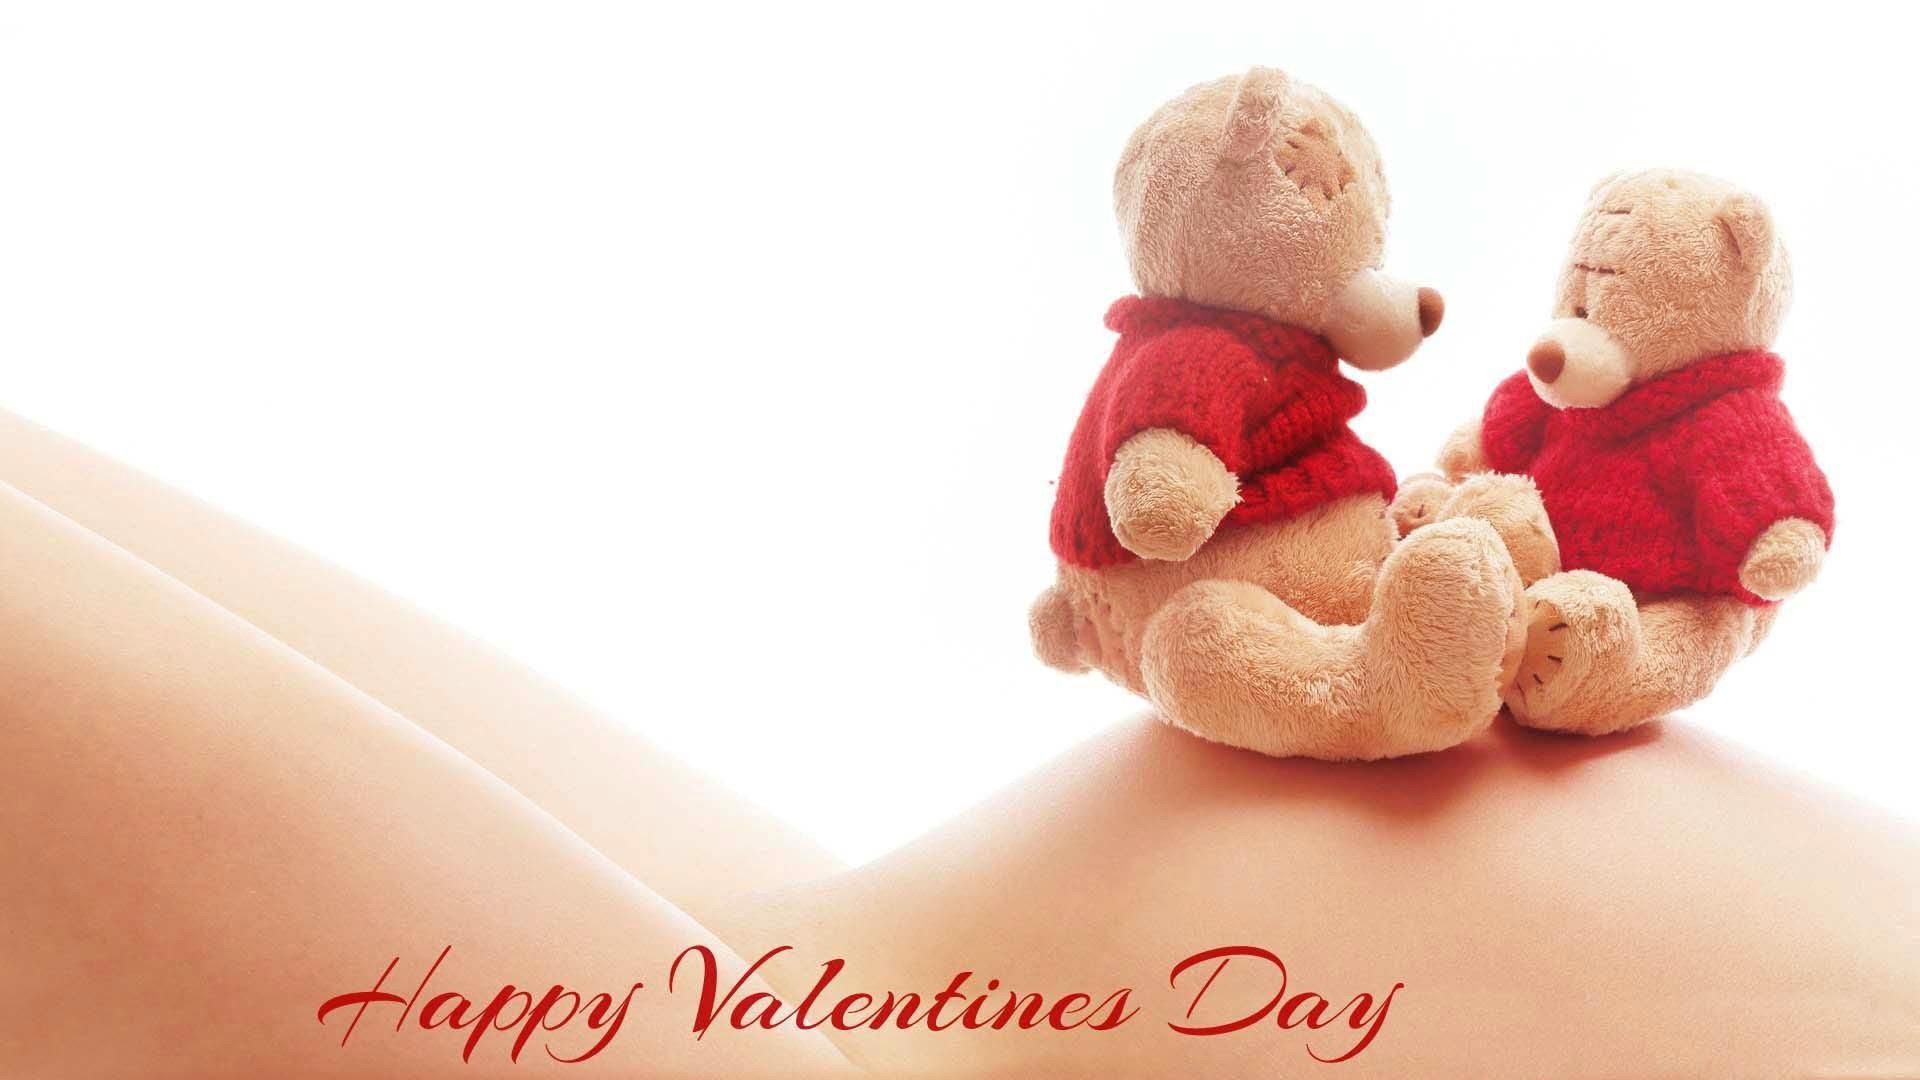 Teddy Teddy Day Wallpapers For Mobile & Desktop13 - Happy Teddy Day 2017 , HD Wallpaper & Backgrounds